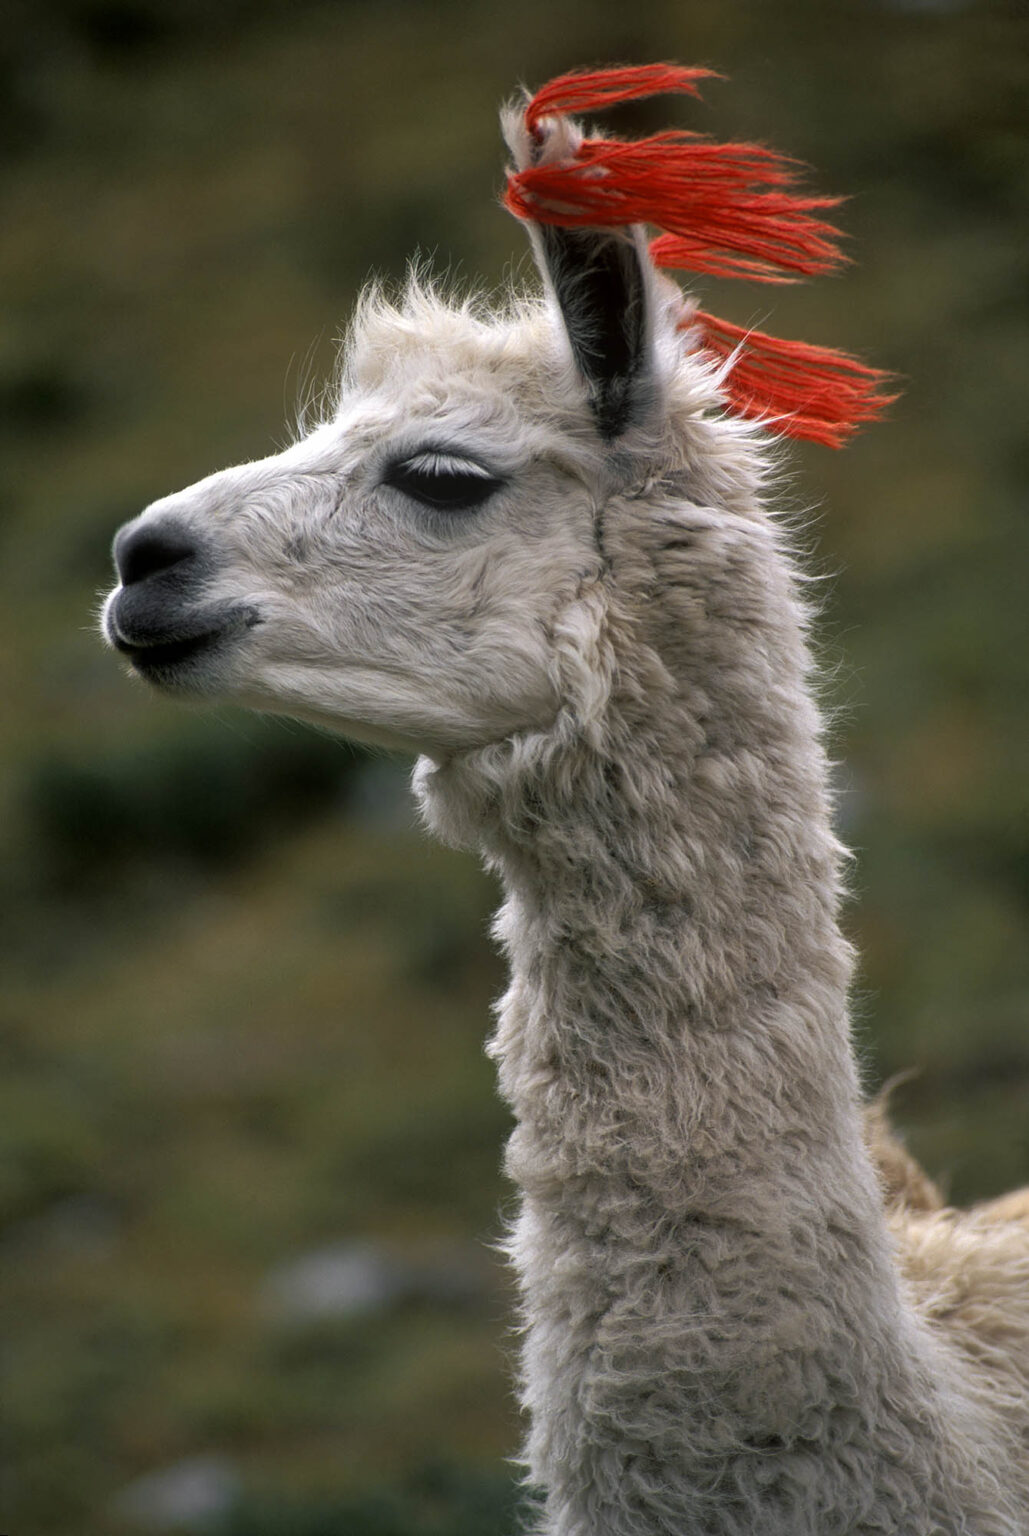 Close-up of white LLAMA with tassels at LLULLUCHAPAMPA (12,000 ft.) on the INCA TRAIL to MACHU PICCHU - PERU